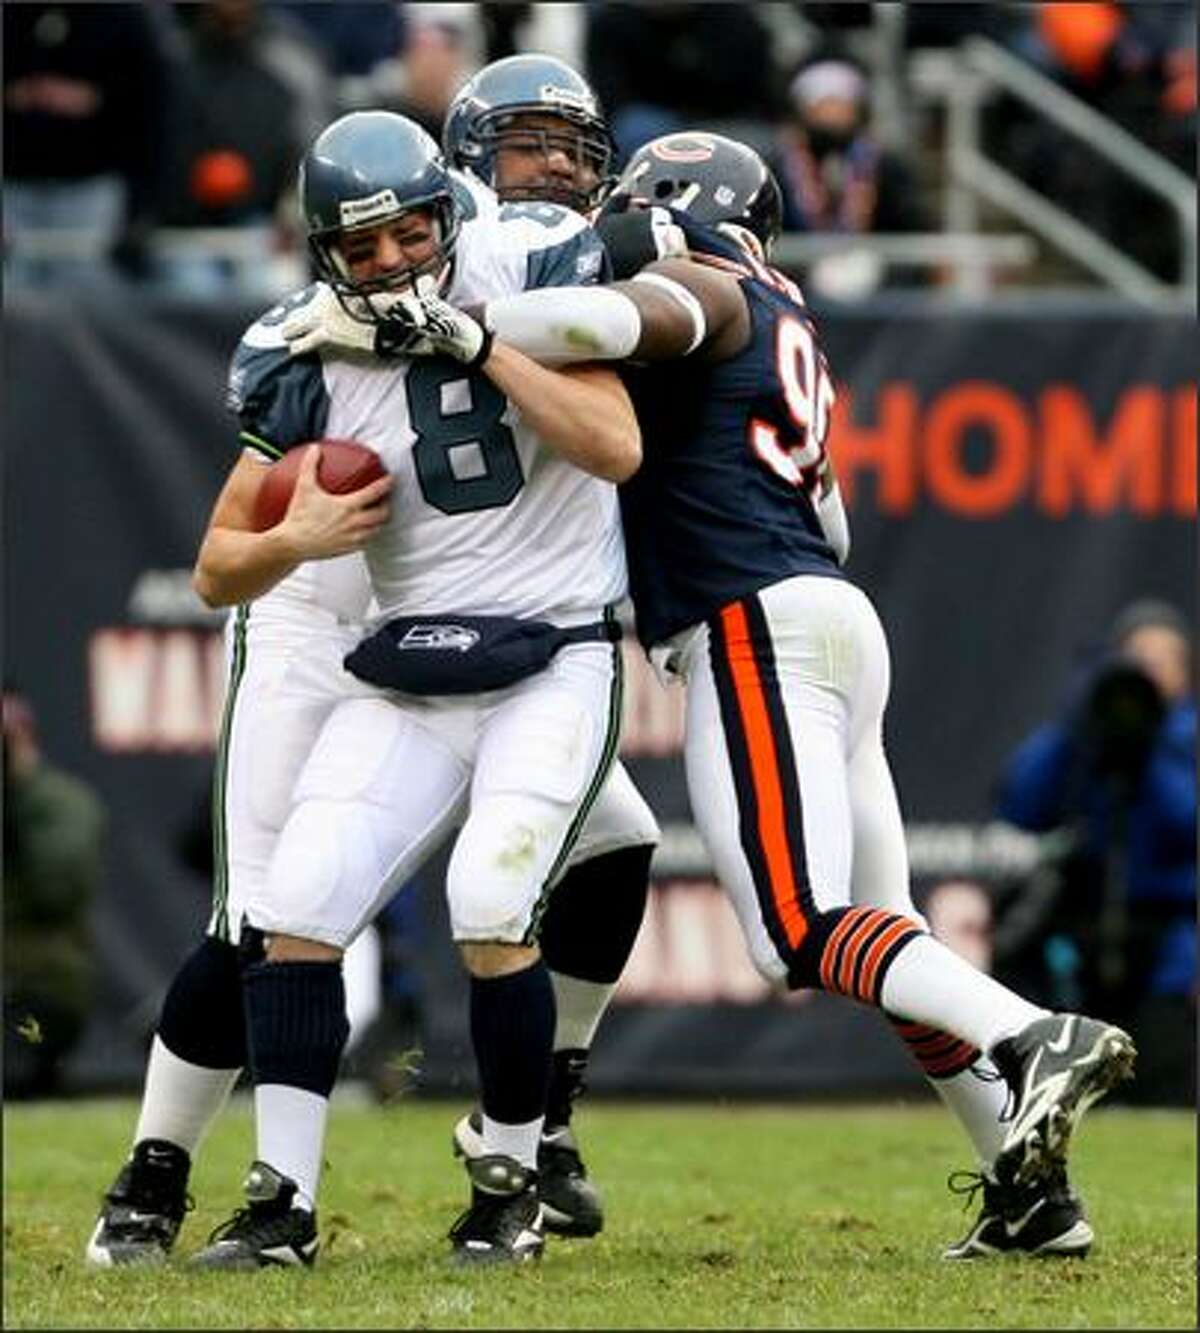 Matt Hasselbeck gets sacked near the end of the first half by Chicago's Alex Brown.